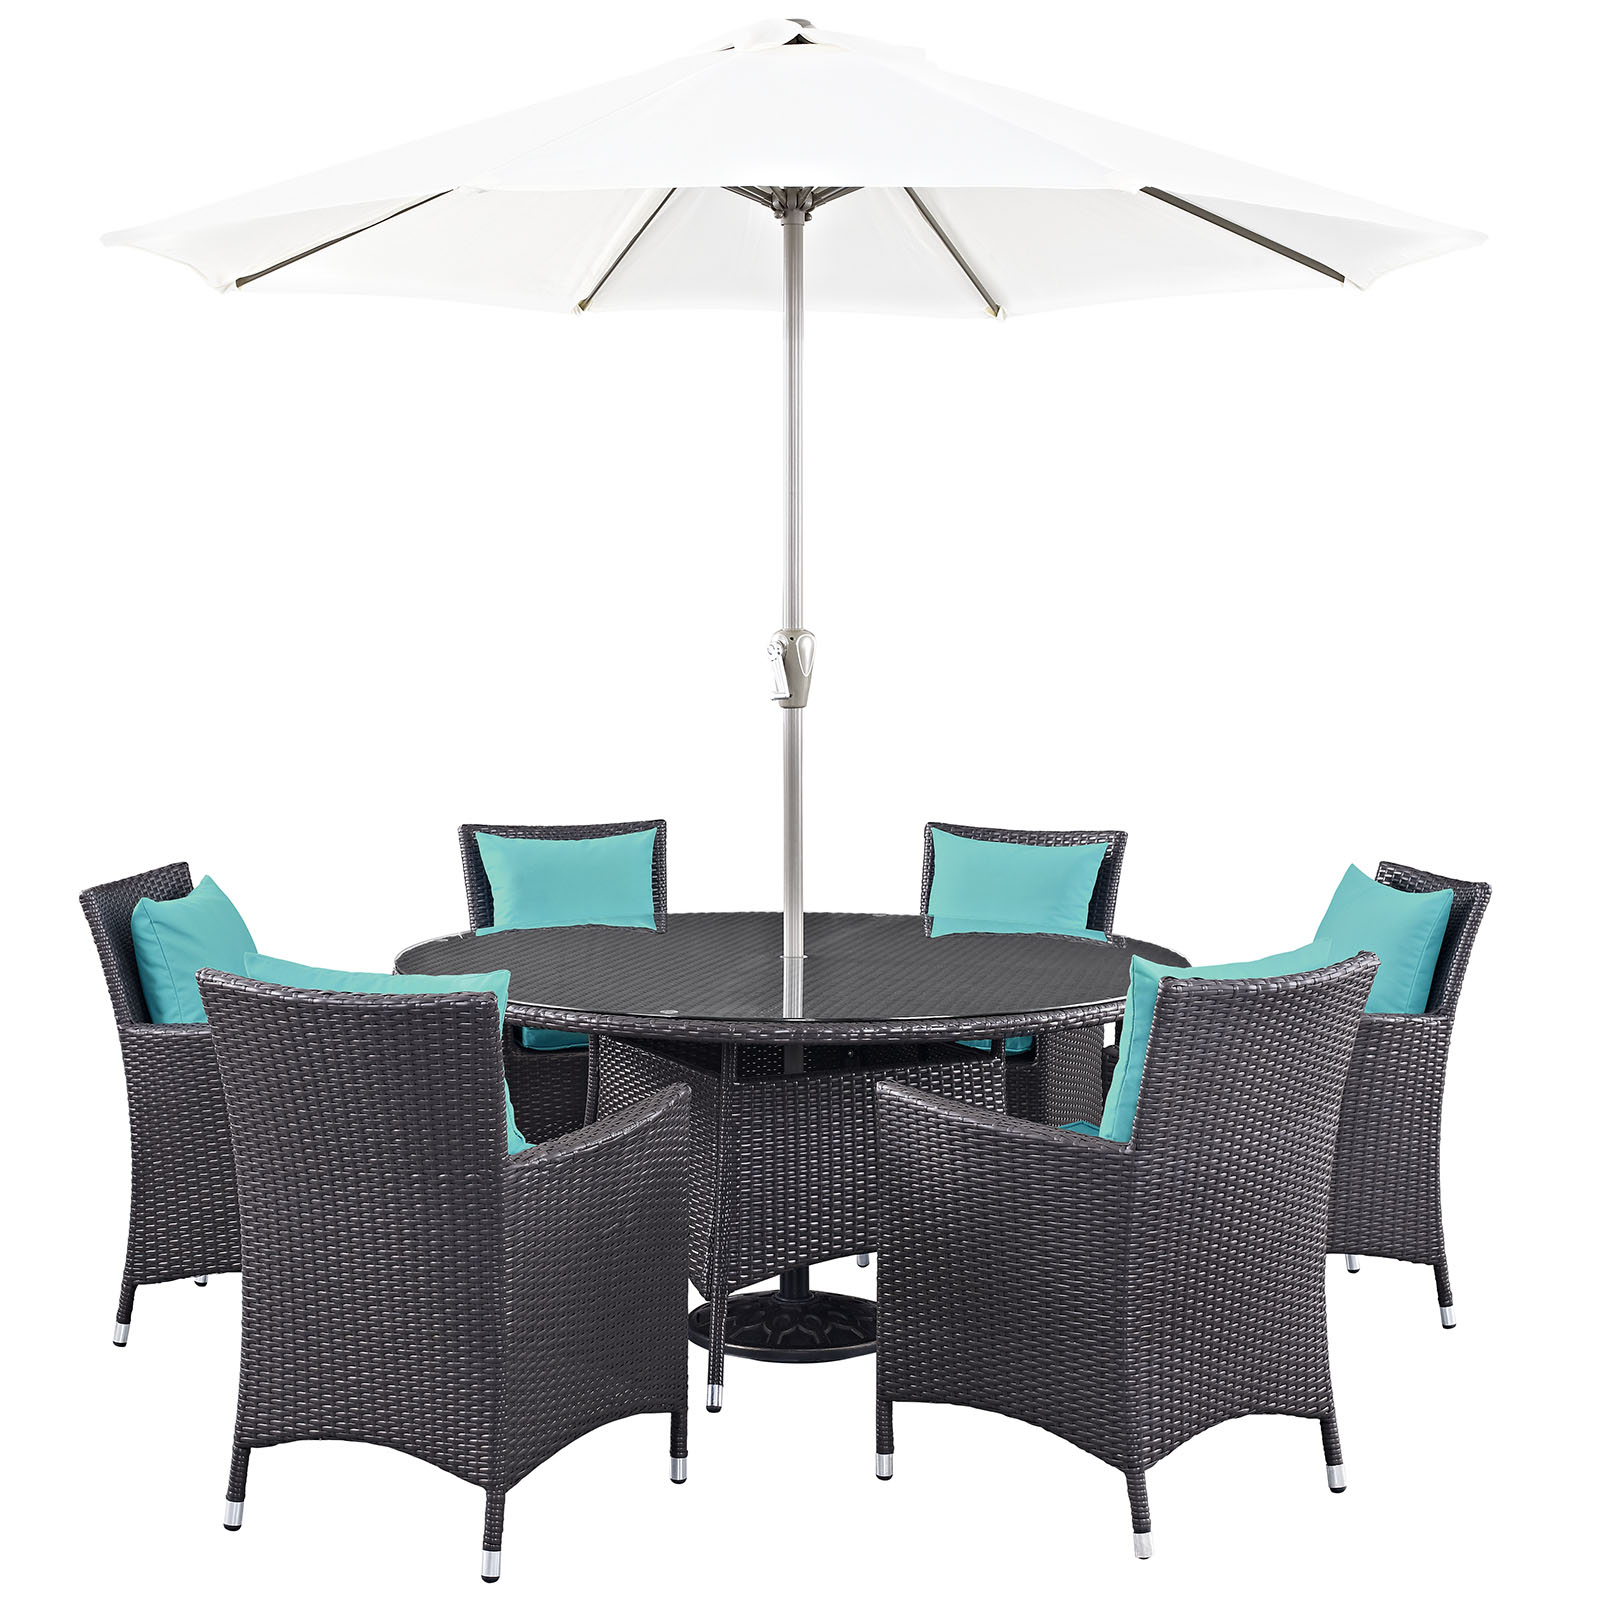 Modway Convene 8 Piece Outdoor Patio Dining Set in Espresso Turquoise - image 2 of 6